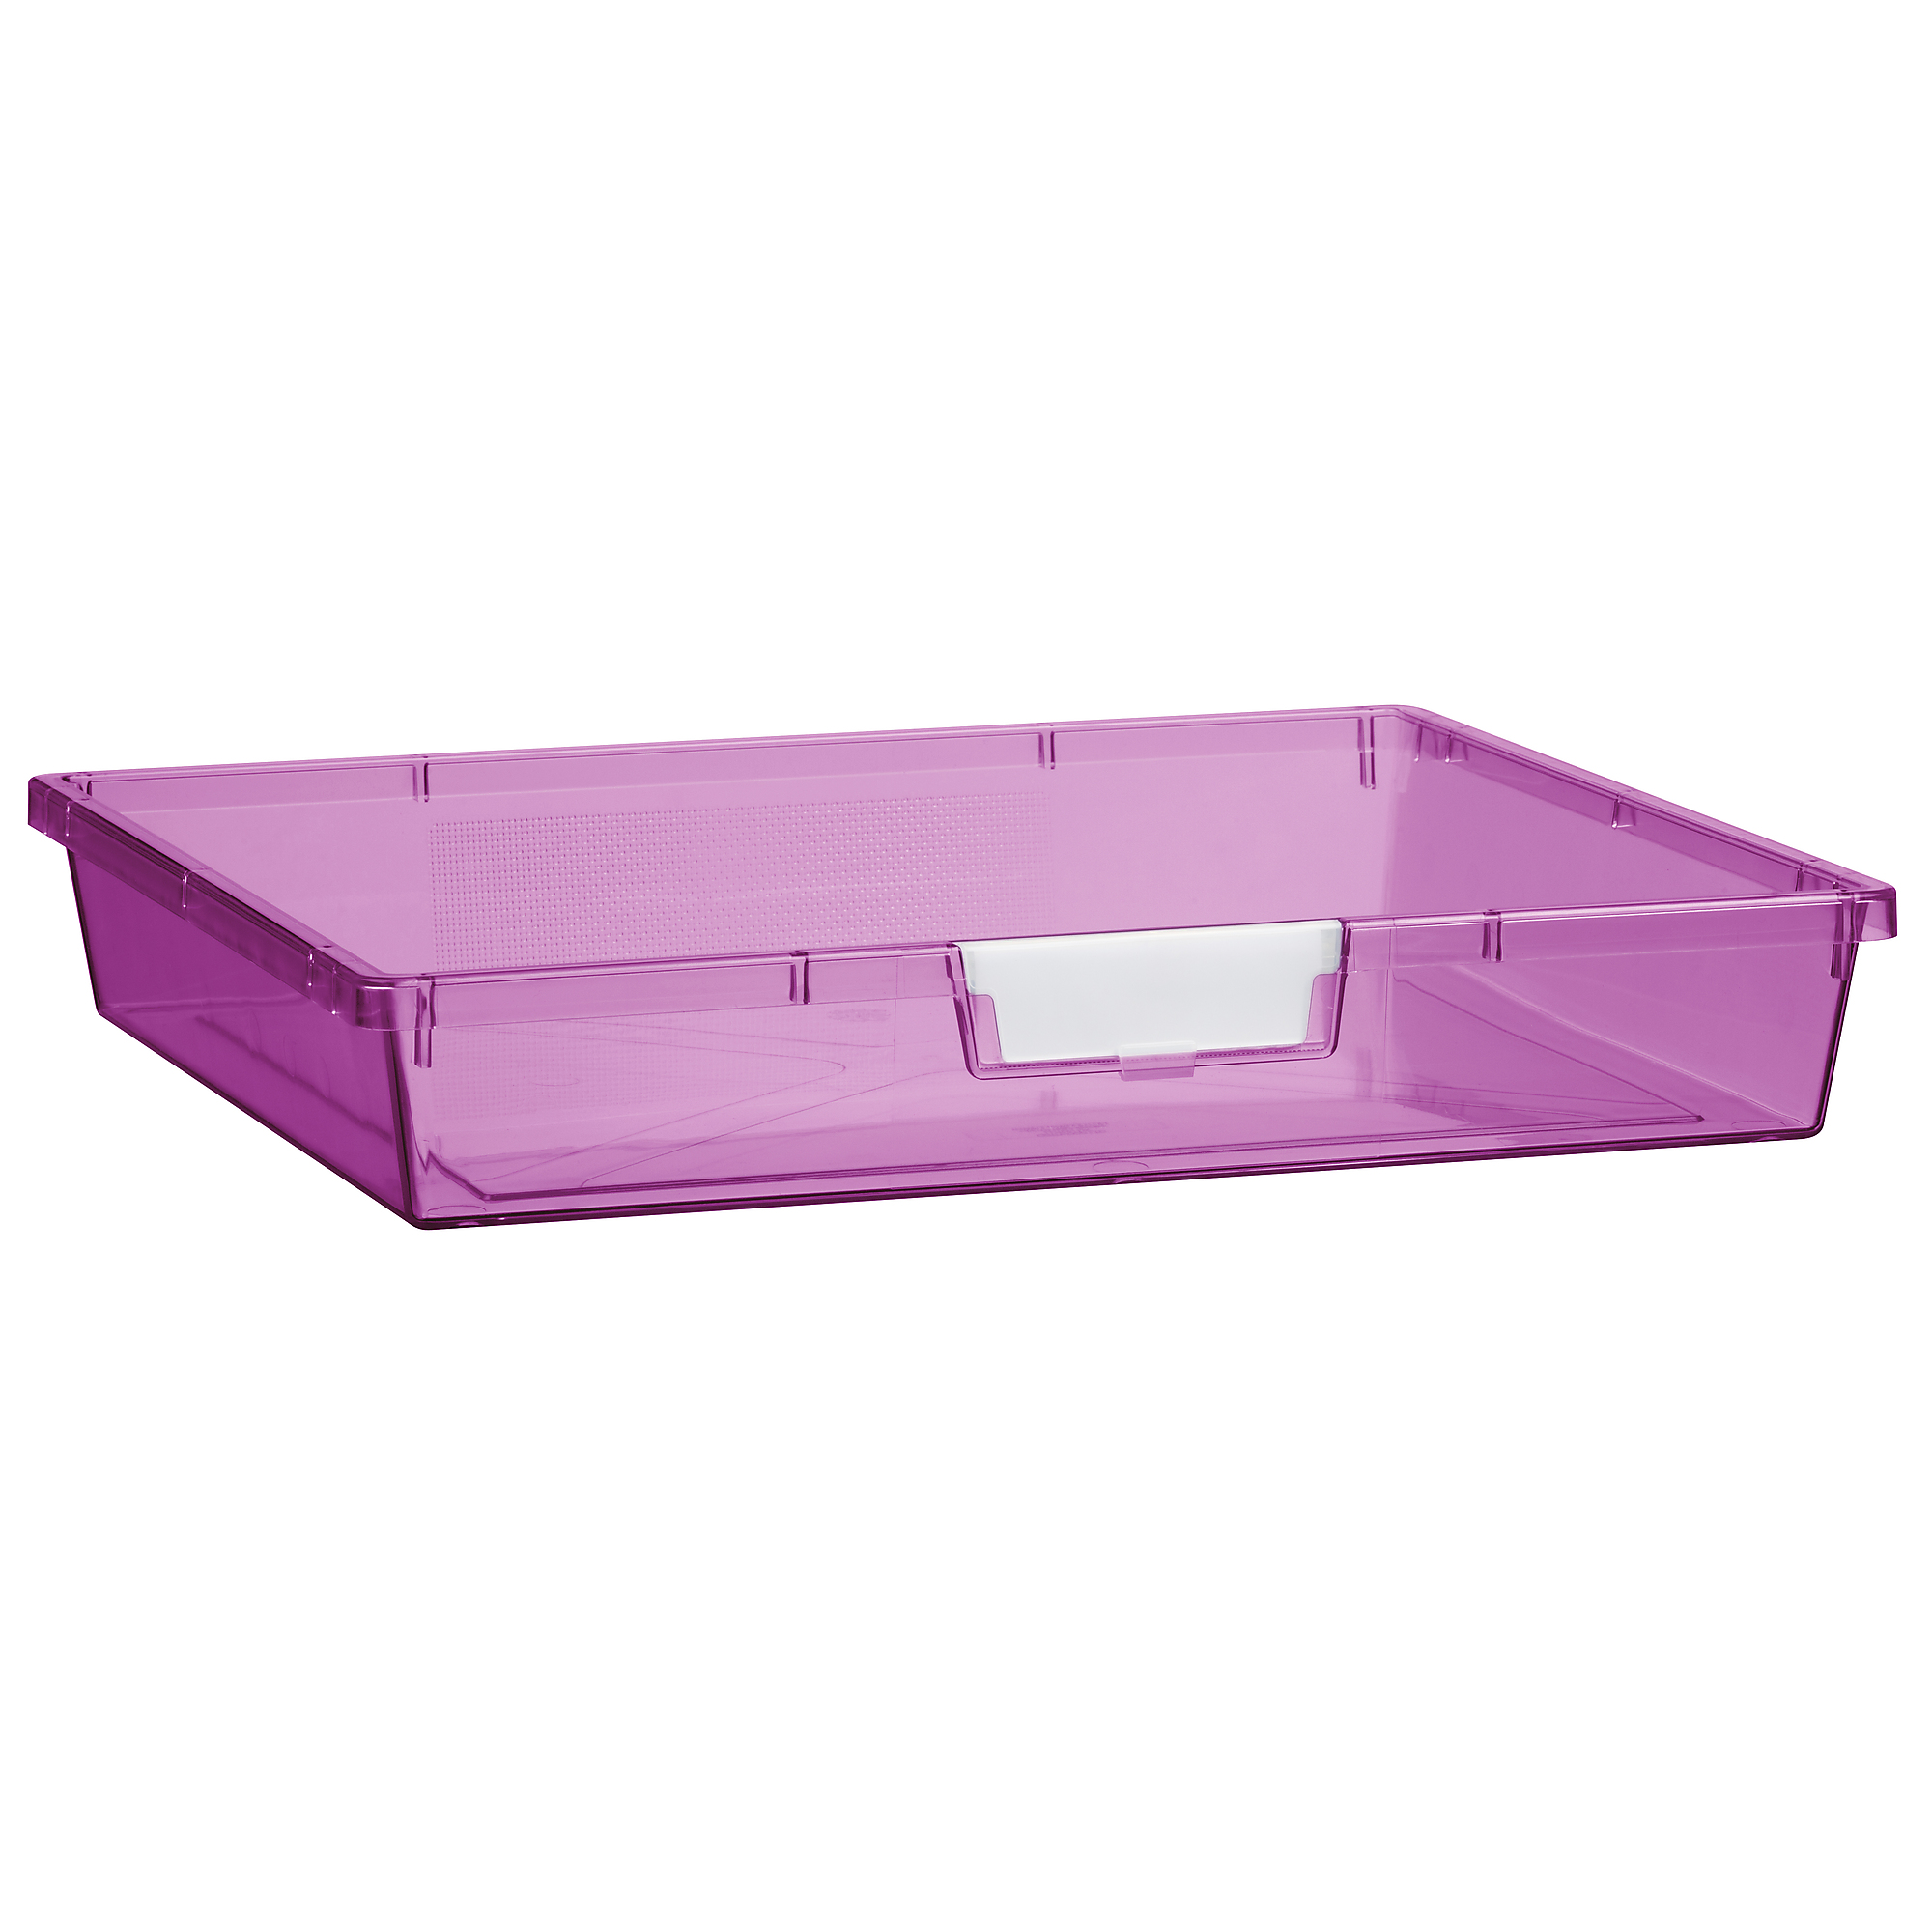 Certwood StorWerks, Wide Line Tray 3Inch in Tinted Purple - 3 Pack, Included (qty.) 3, Material Plastic, Height 12 in, Model CE1956TP3